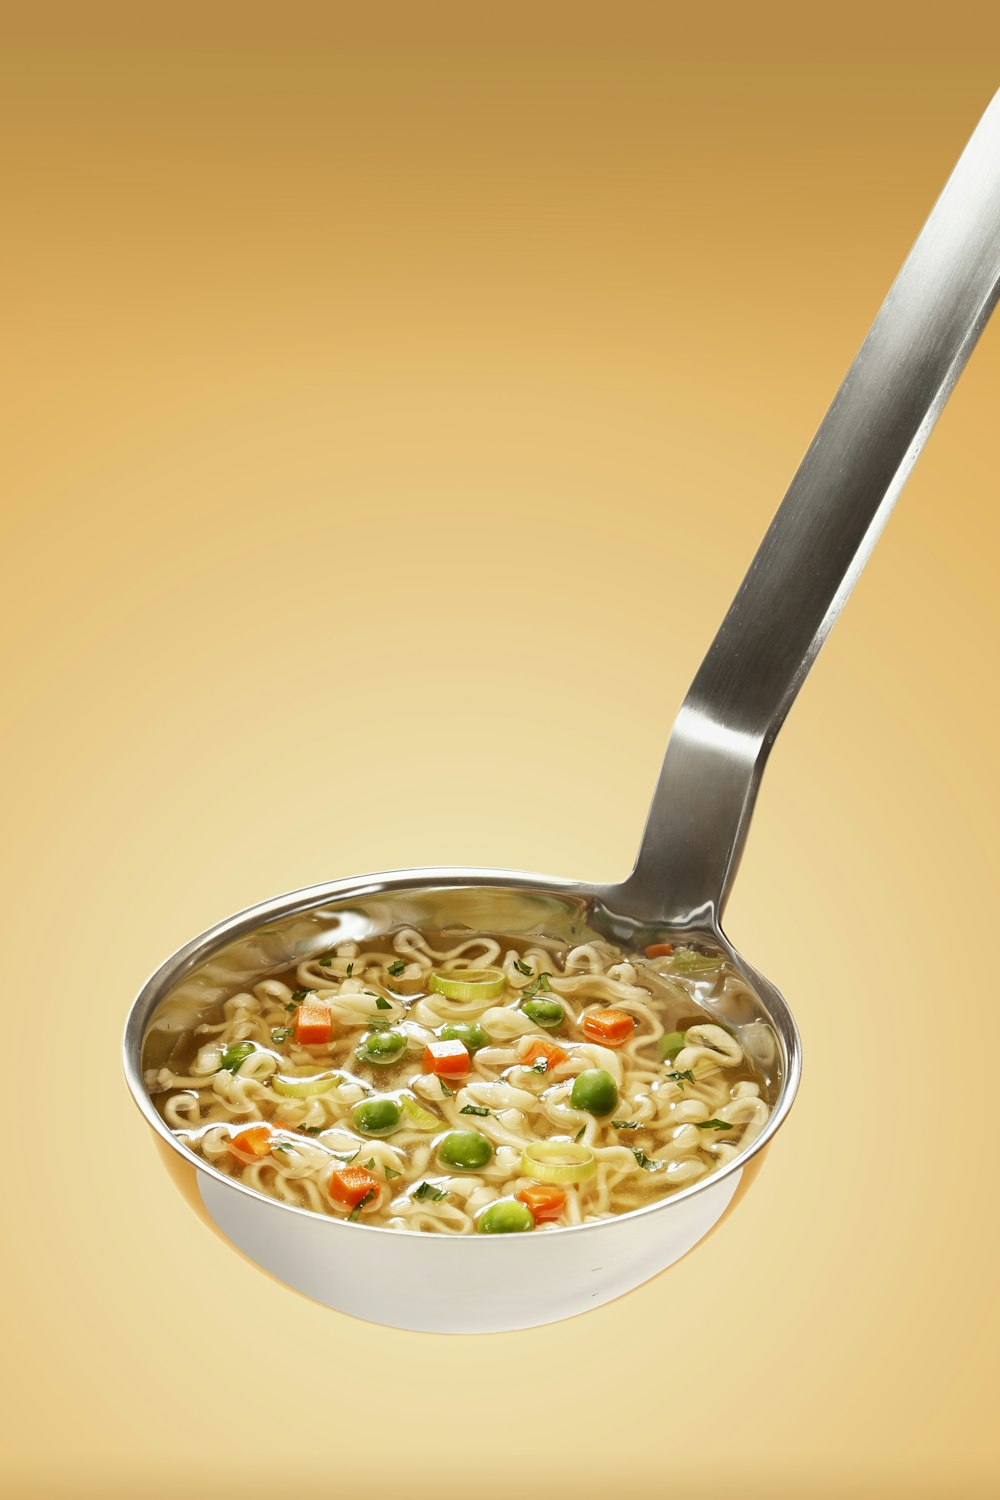 silver steel scoop with noodles